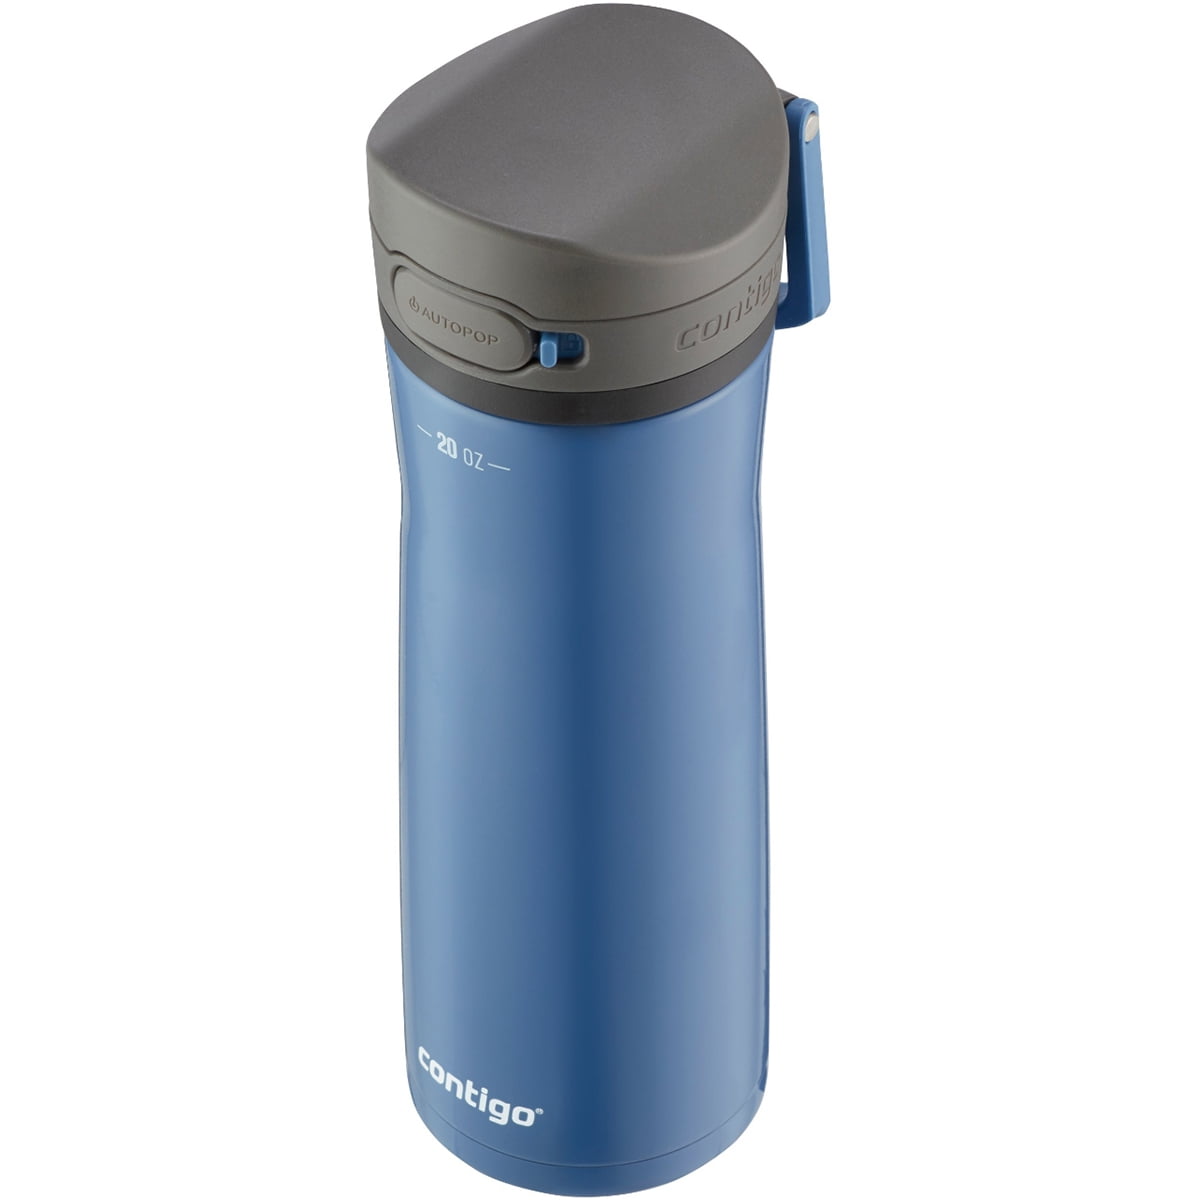  Contigo Jackson Chill 2.0 Vacuum-Insulated Stainless Steel  Water Bottle, Secure Lid Technology for Leak-Proof Travel, Keeps Drinks  Cold for 12 Hours, 20oz Steel/Blue Corn: Home & Kitchen